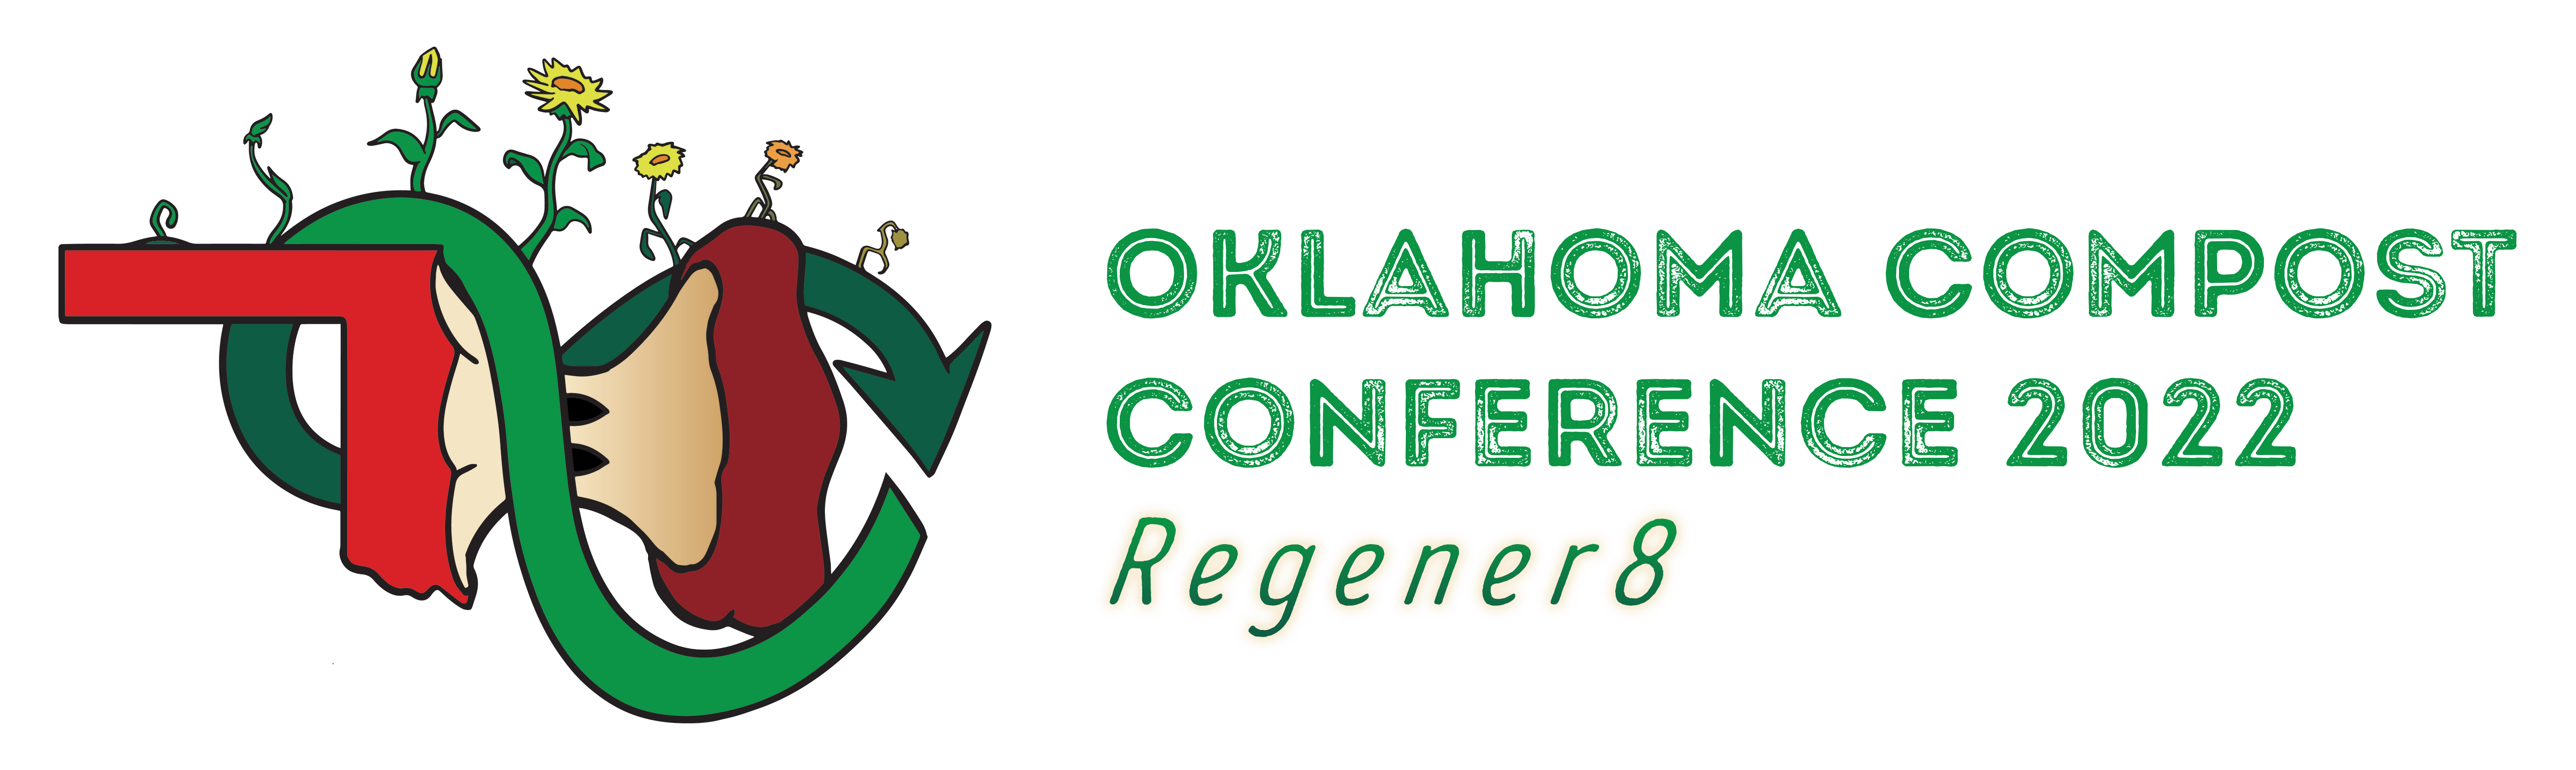 Banner image of green infinity symbol wrapped around red apple core with the text Oklahoma Compost Conference 2022 Regener8